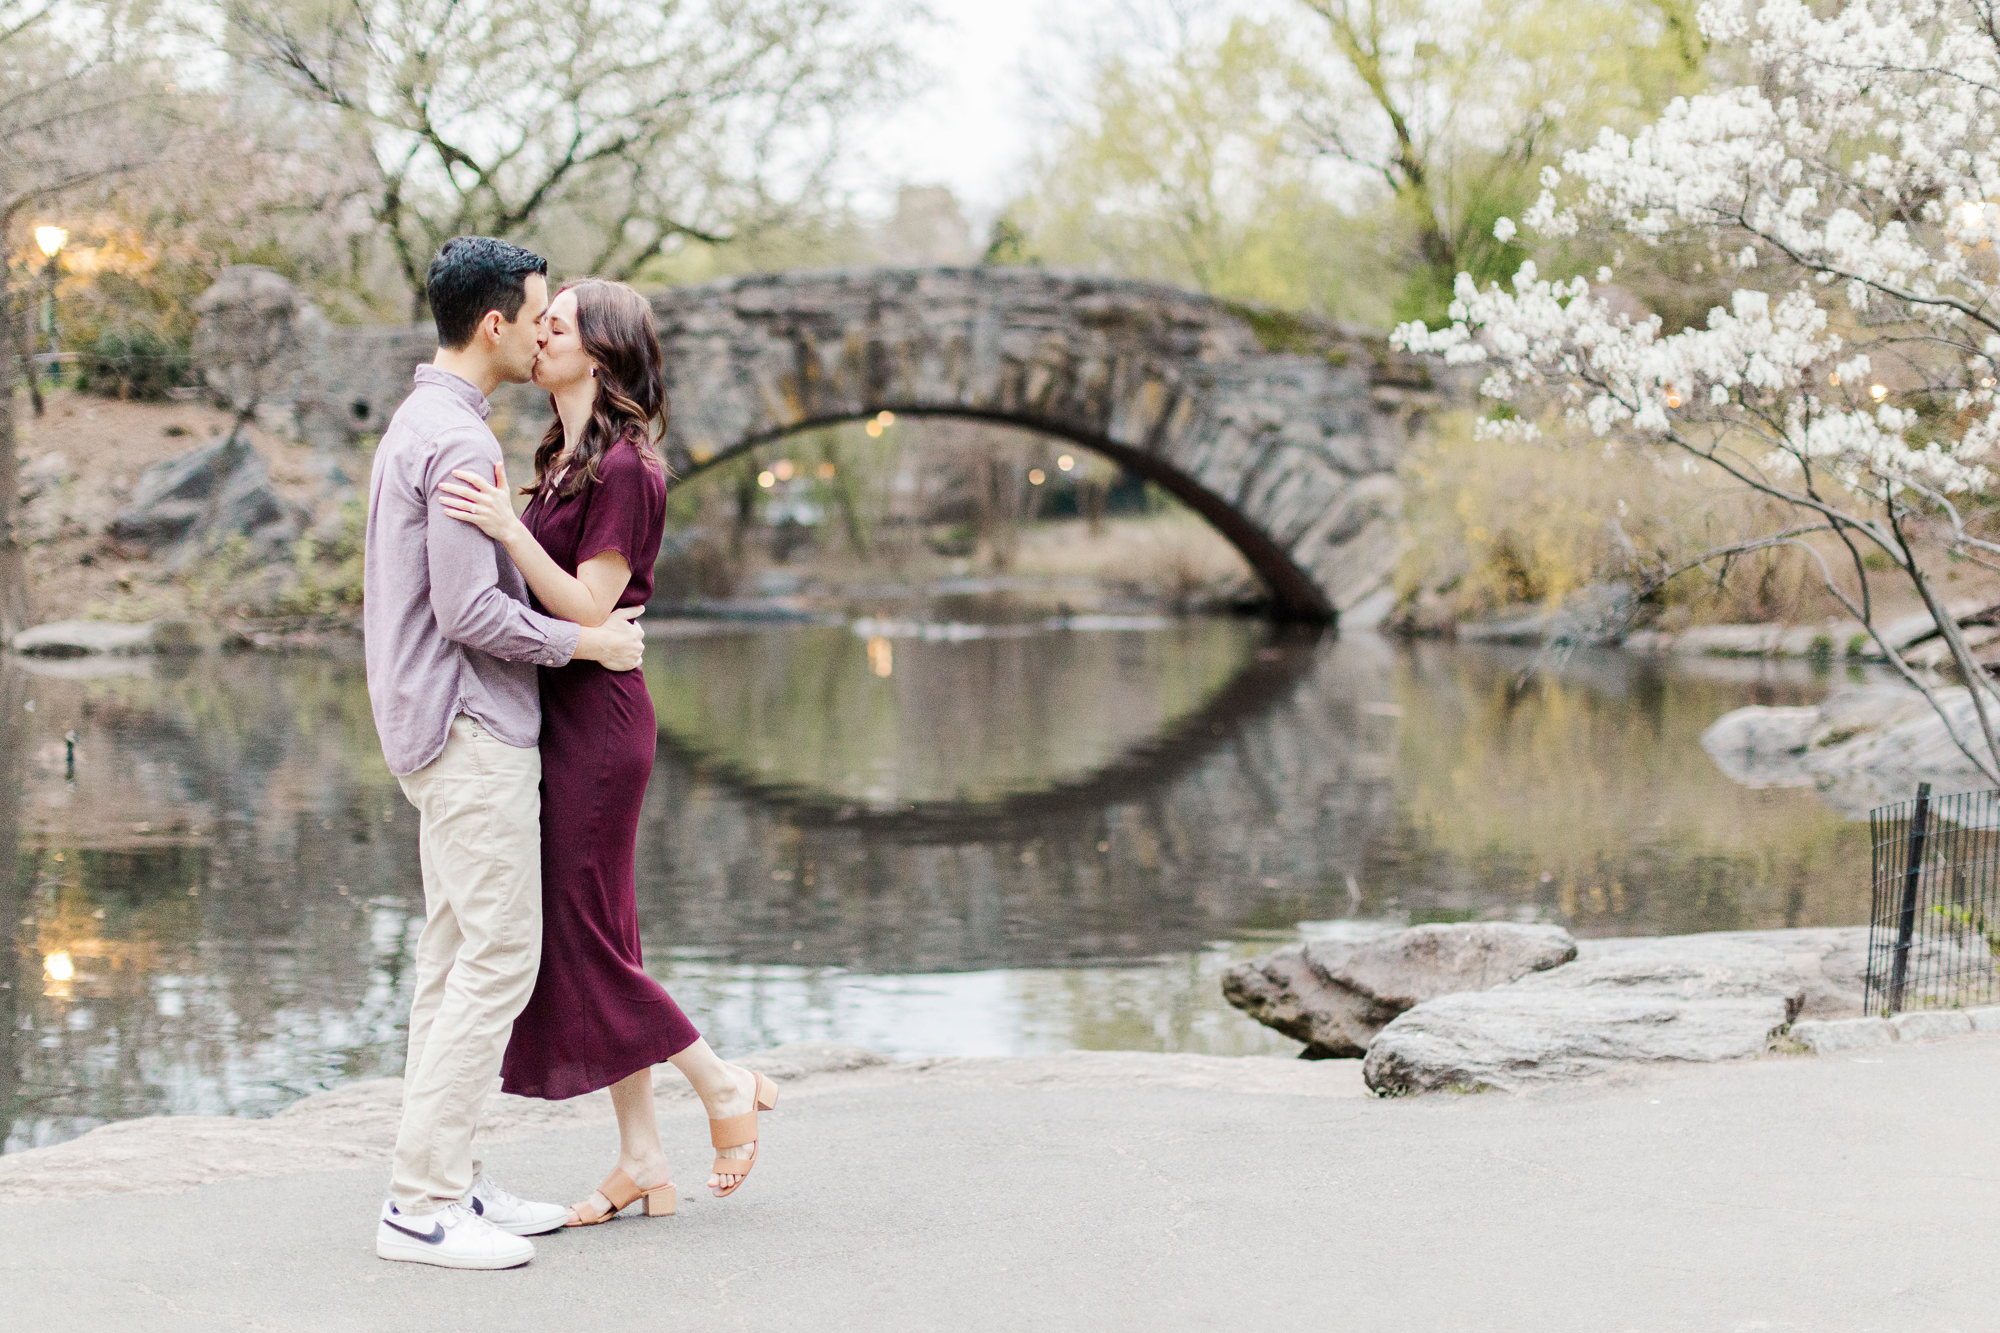 Fun-Filled Central Park Photo Shoot